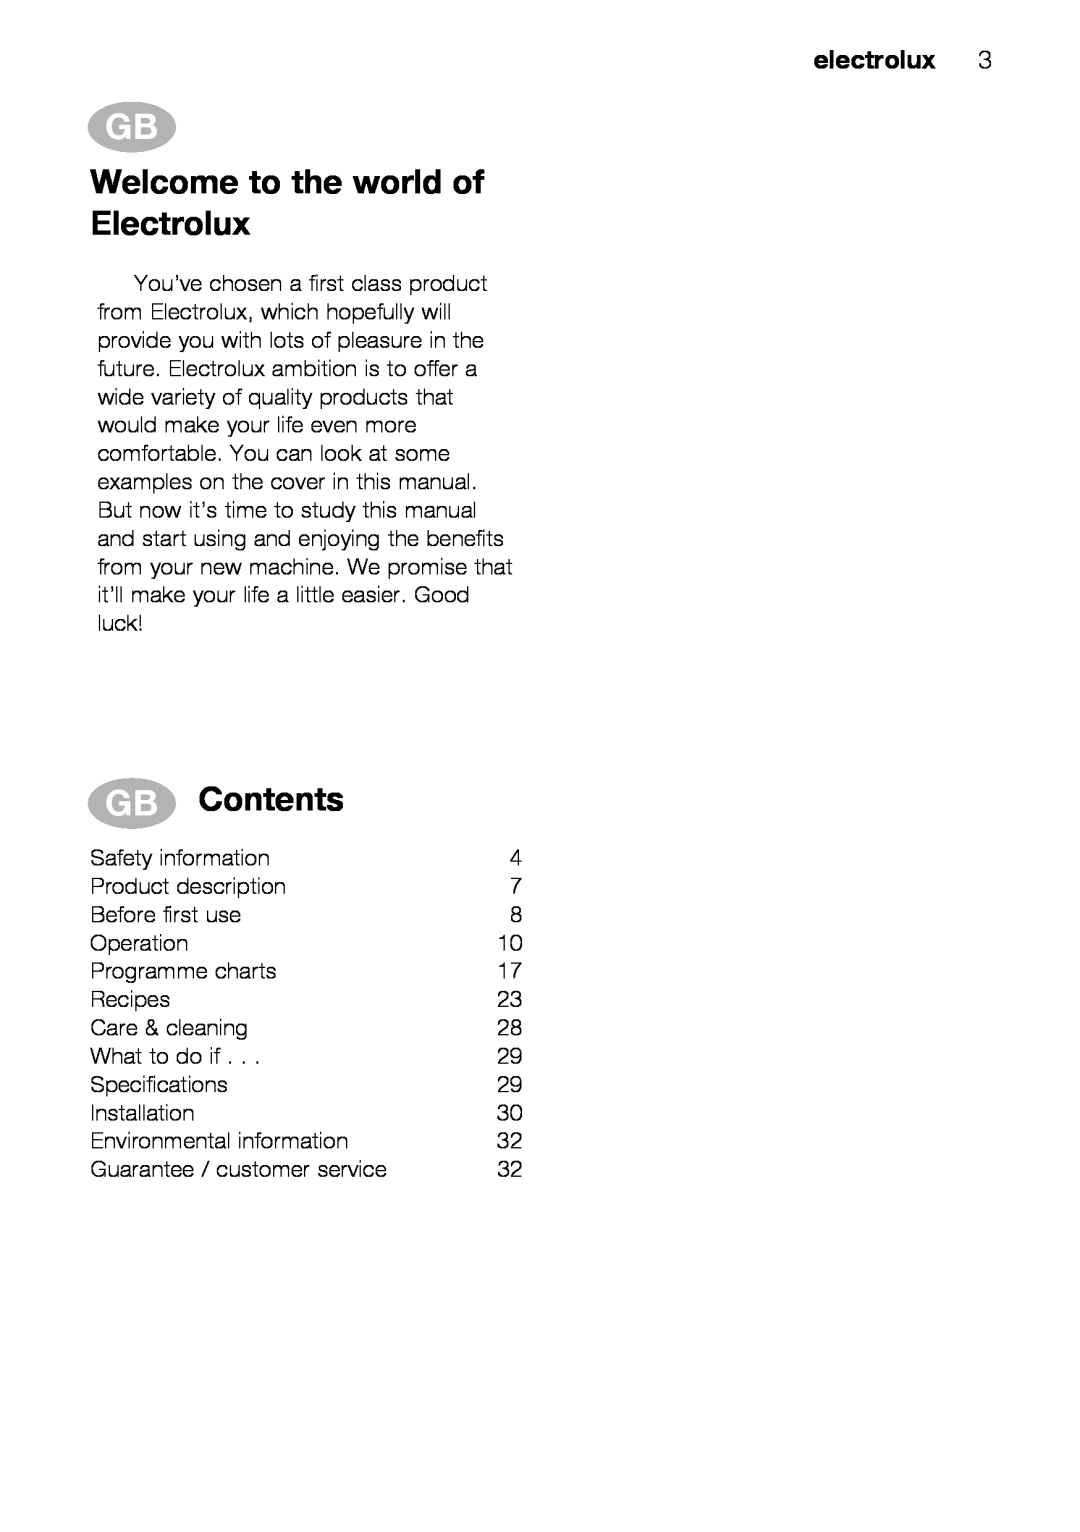 Electrolux EMS26415 user manual Welcome to the world of Electrolux, Contents, electrolux 